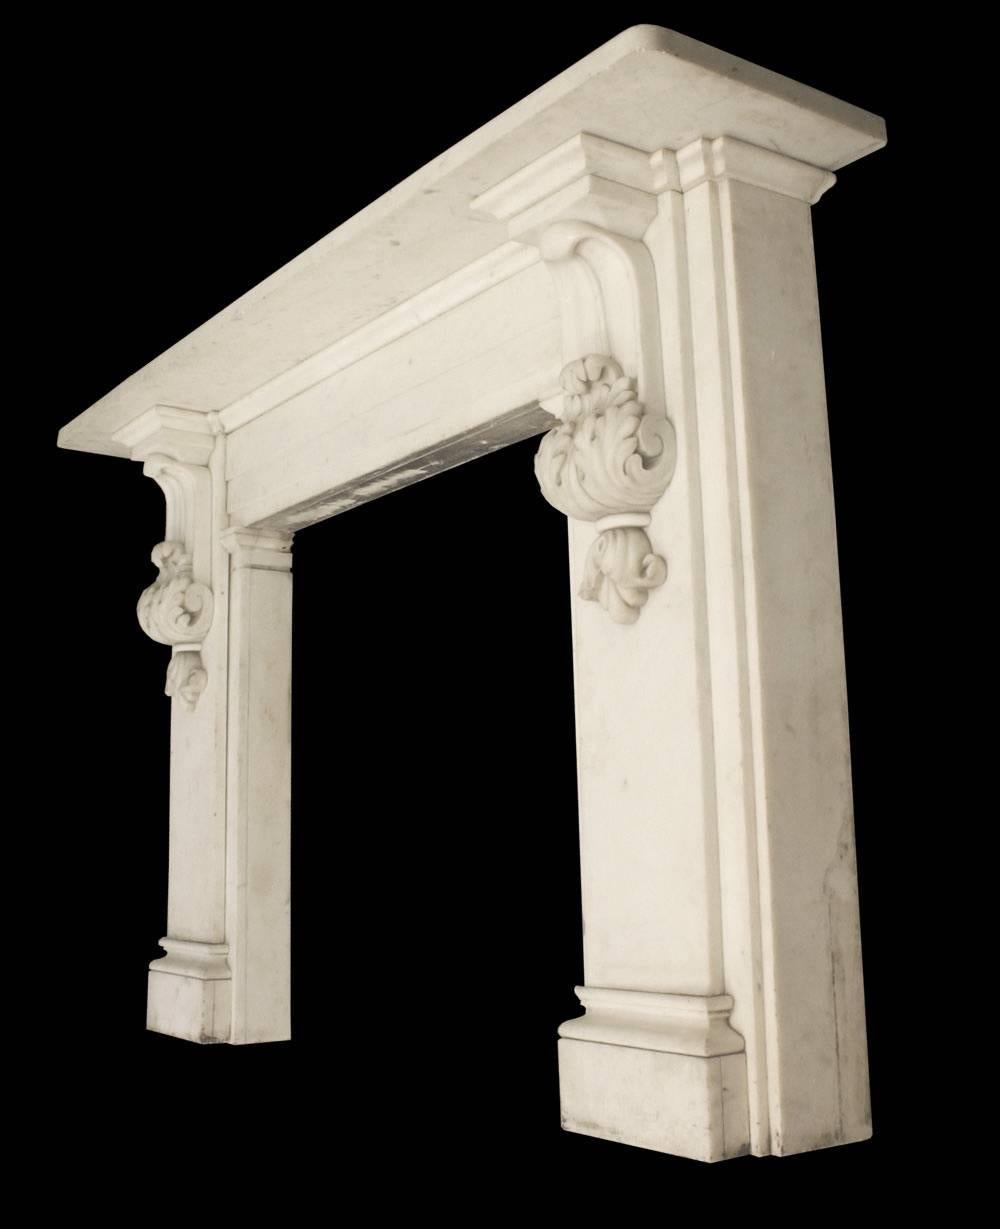 Superb antique William IV statuary white marble fire surround with extravagant inverted lambs tongue corbels which are embellished with acanthus leaves.

Images prior to restoration. This chimneypiece is awaiting restoration, please enquire as to